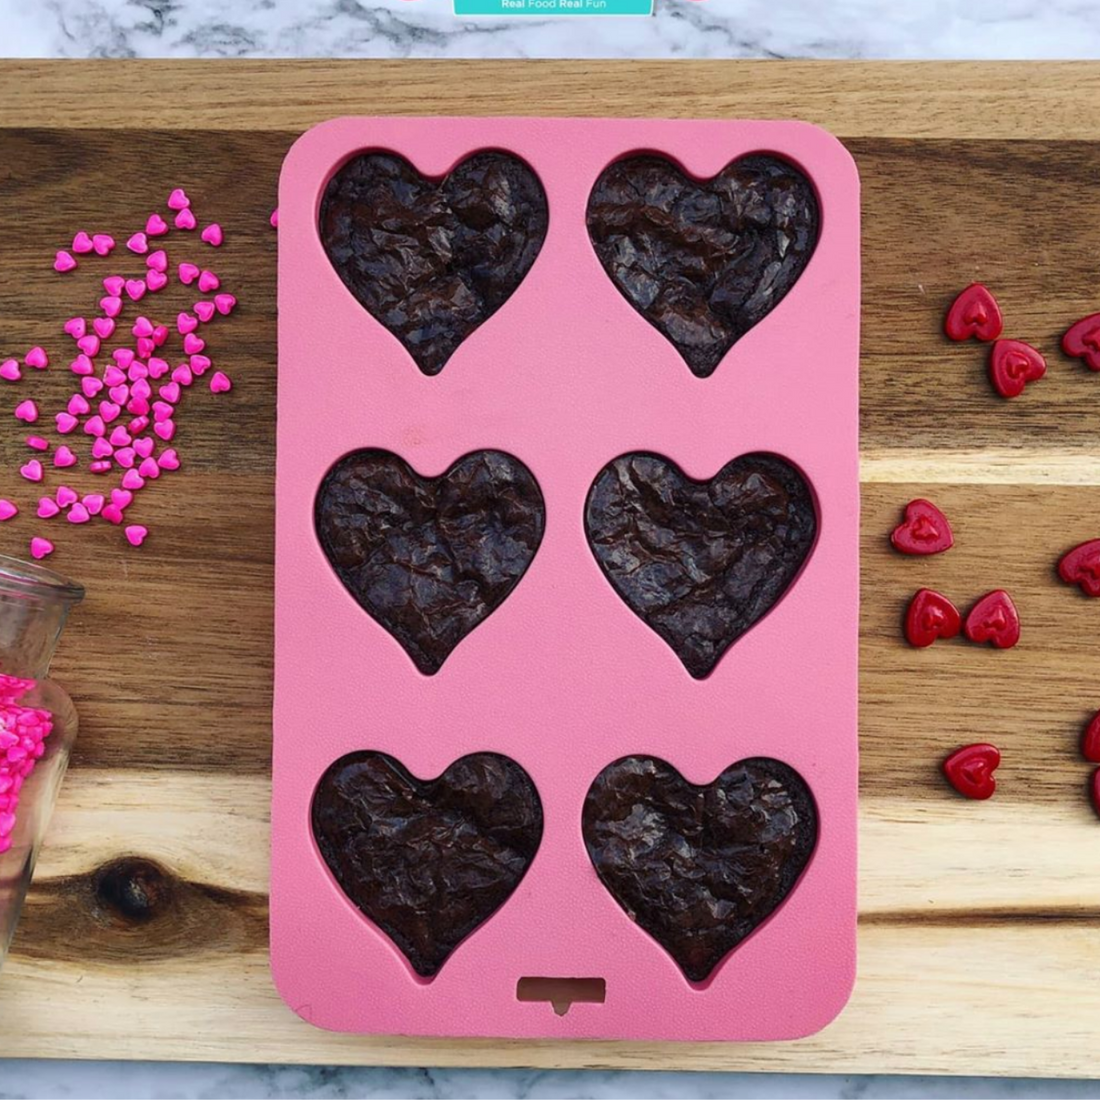 Lifestyle image of chocolate brownies made in Heart Shaped Silicone Baking Mold 